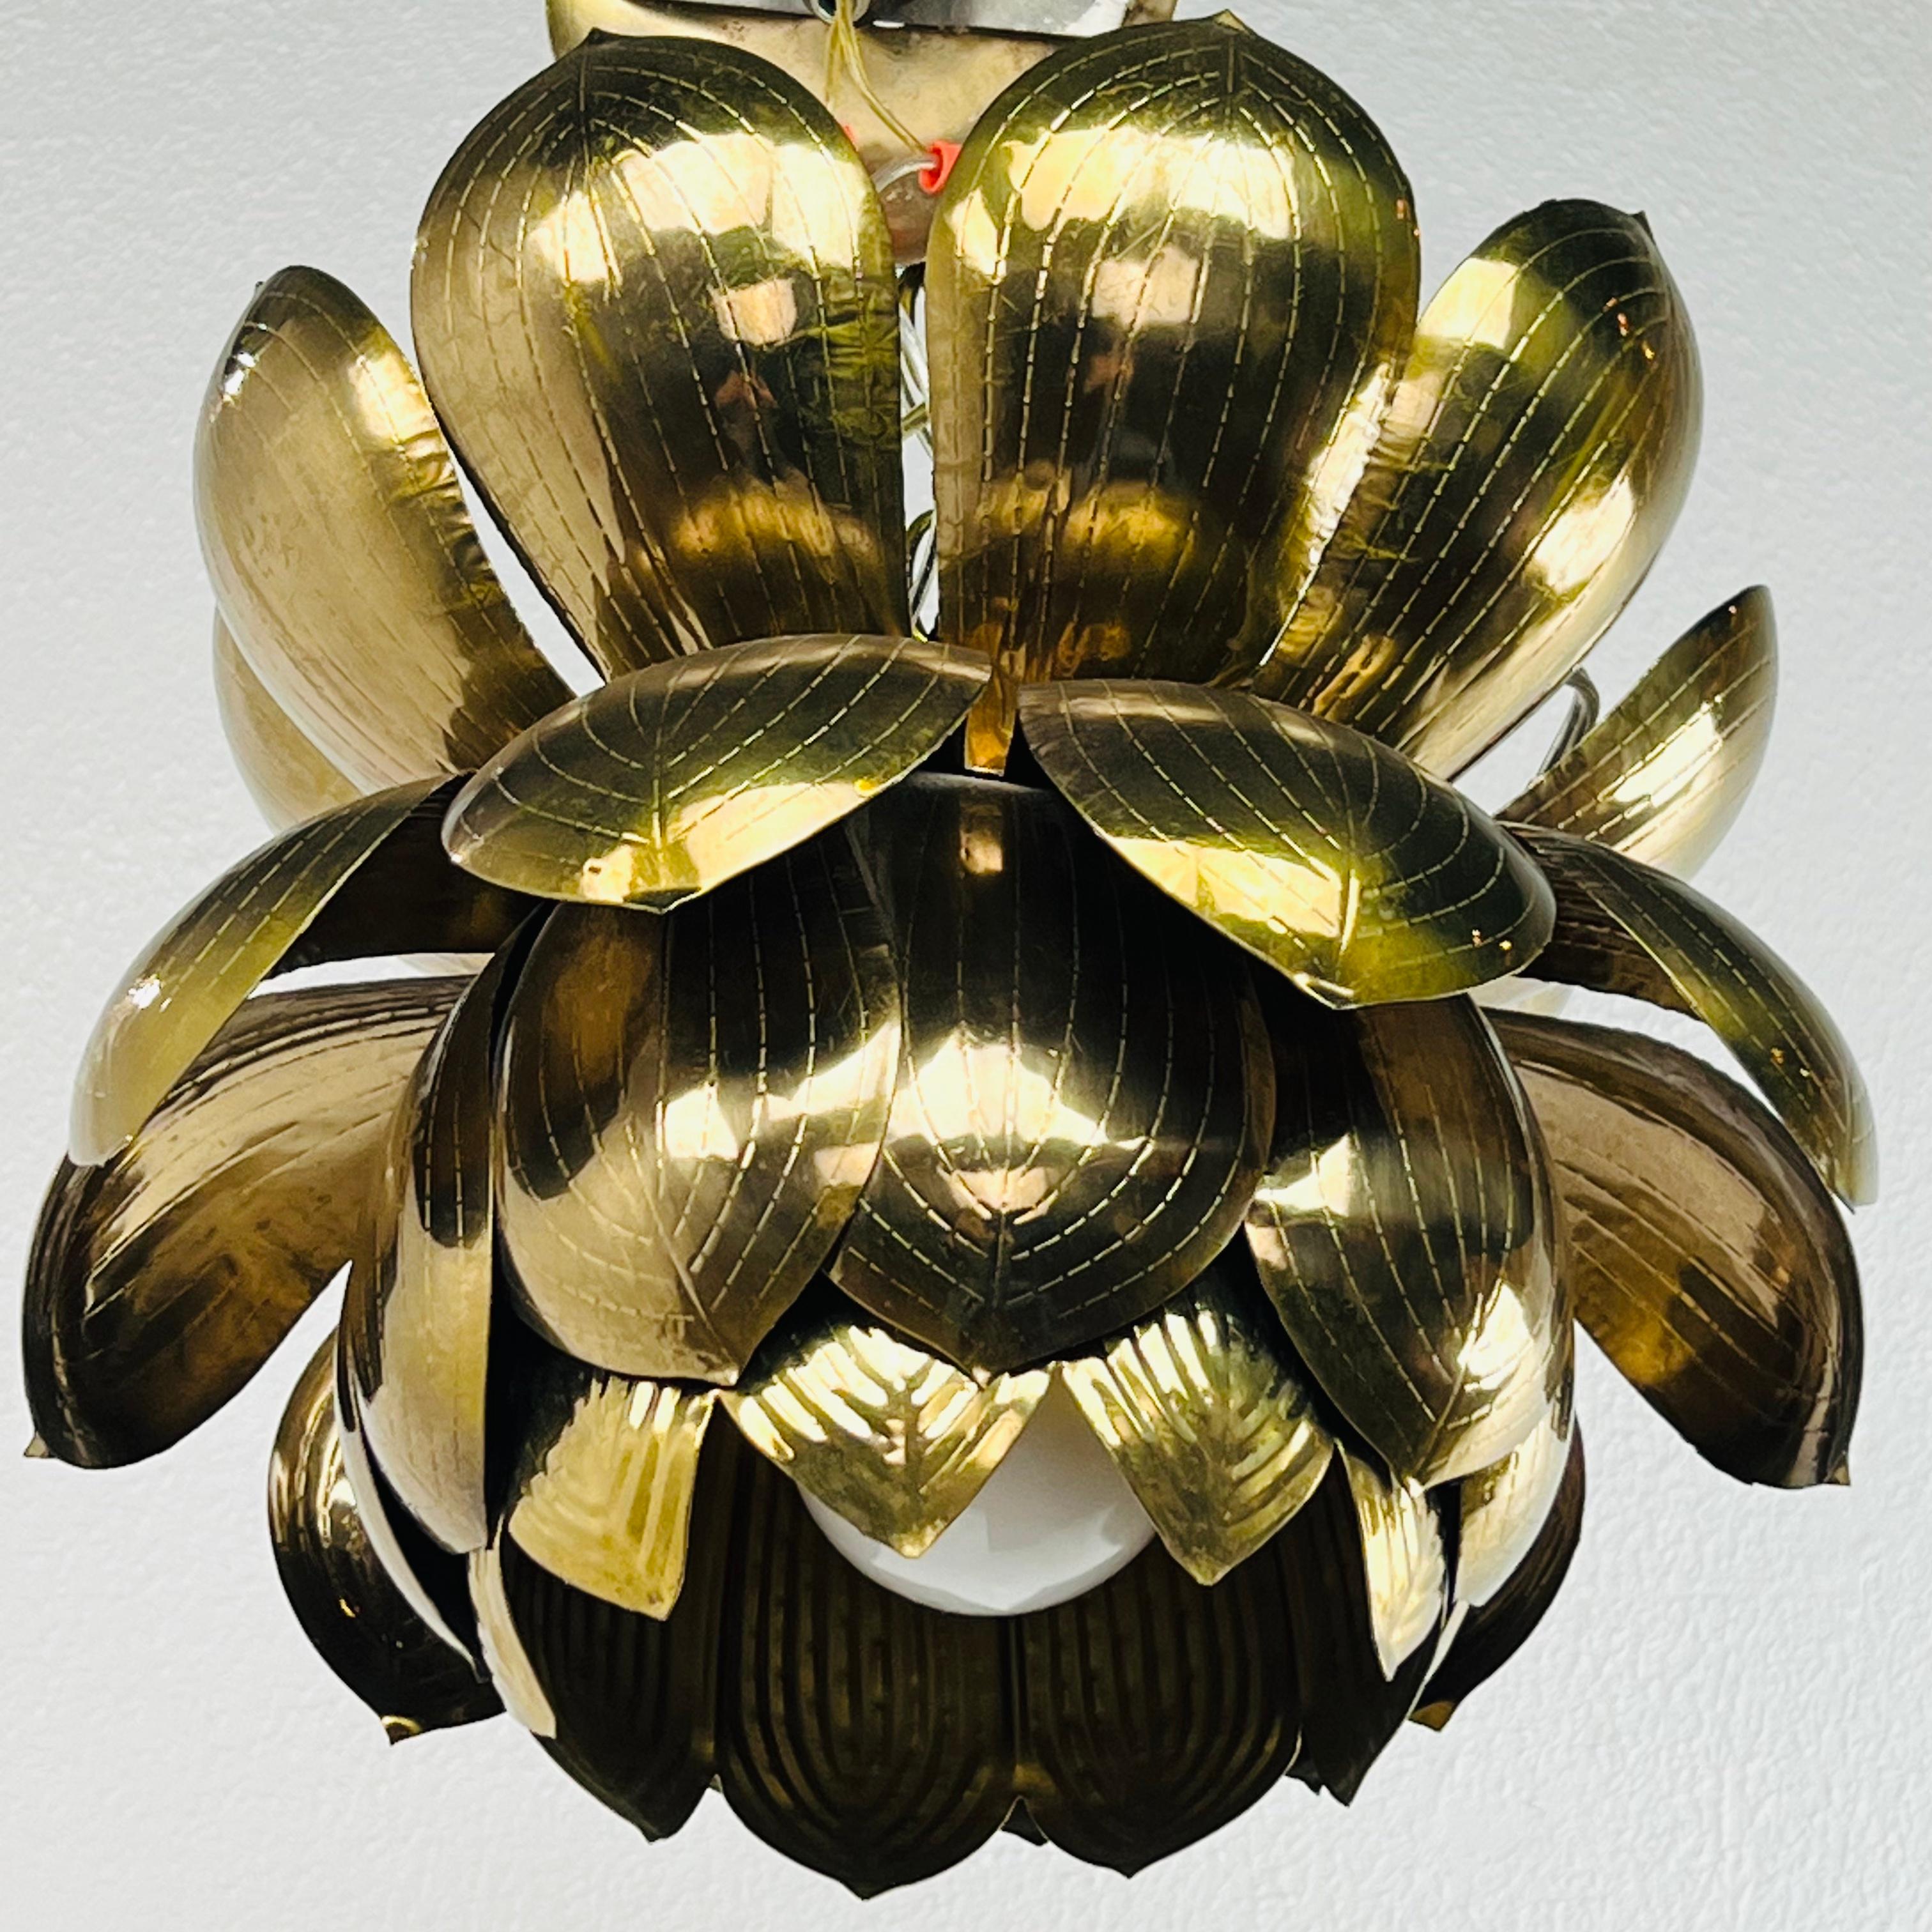 A show stopper and the epitome of glam. Large Parzinger style brass lotus pedant fixture by Feldman Lighting Company. The largest of the Feldman Lotus Fixtures - and often described as in the style of Tommi Parzinger - this pendant has a beautiful